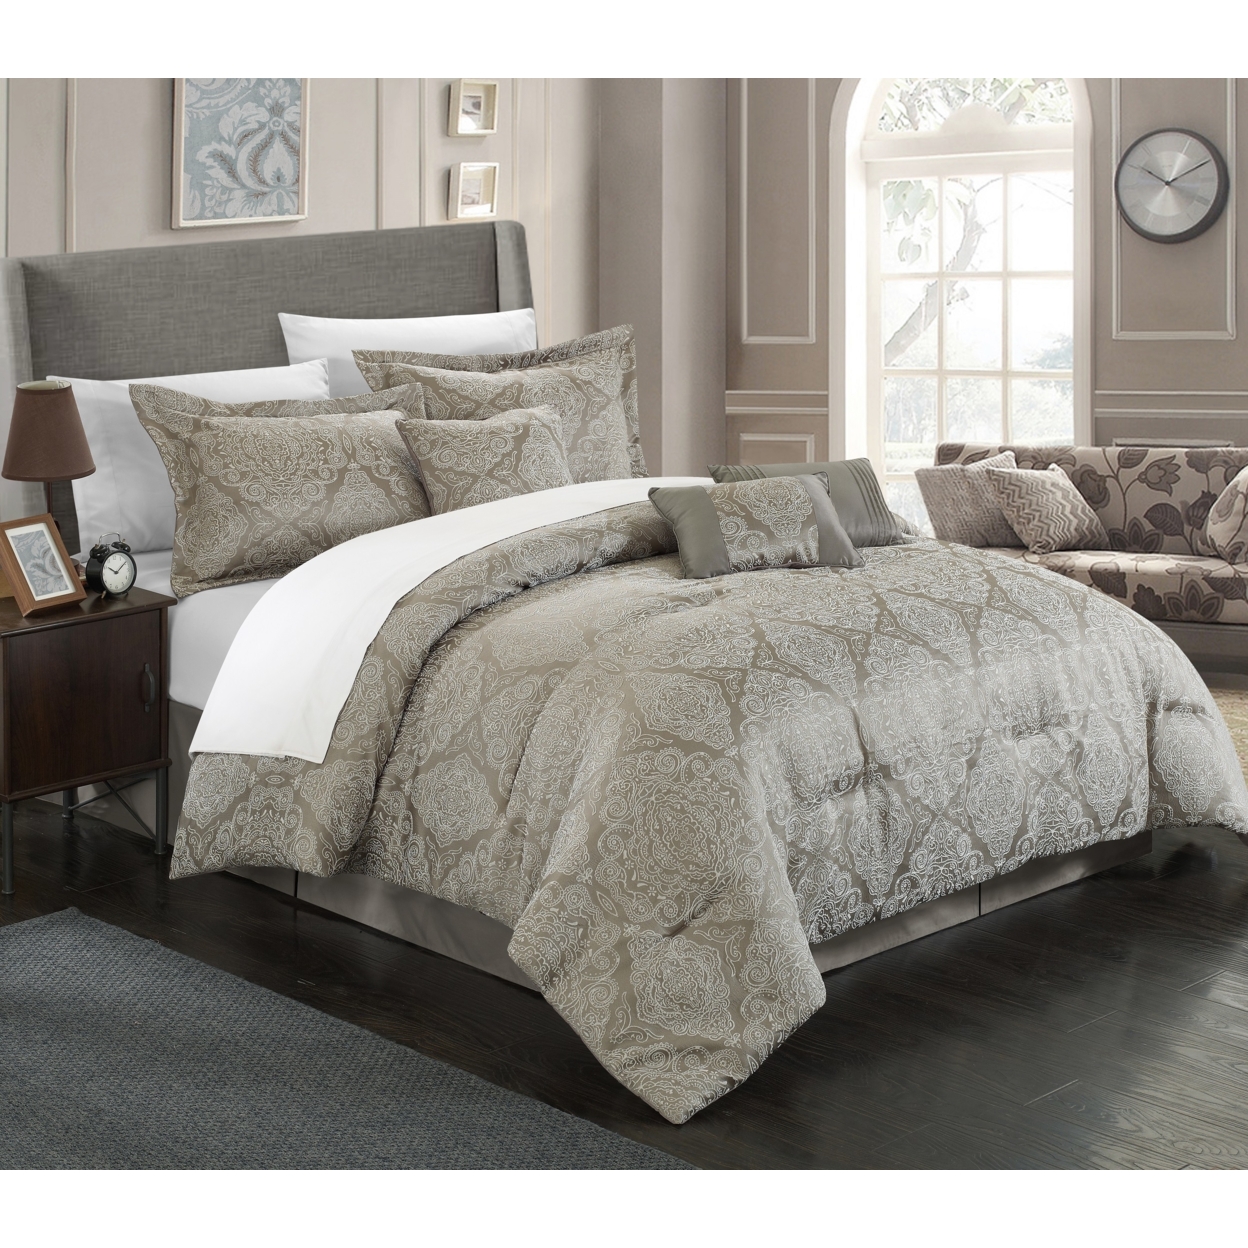 Chic Home 7 Piece Banke Embossed Traditional Jacquard Motif Comforter Set Shams And Decorative Pillows Included - Grey, Queen